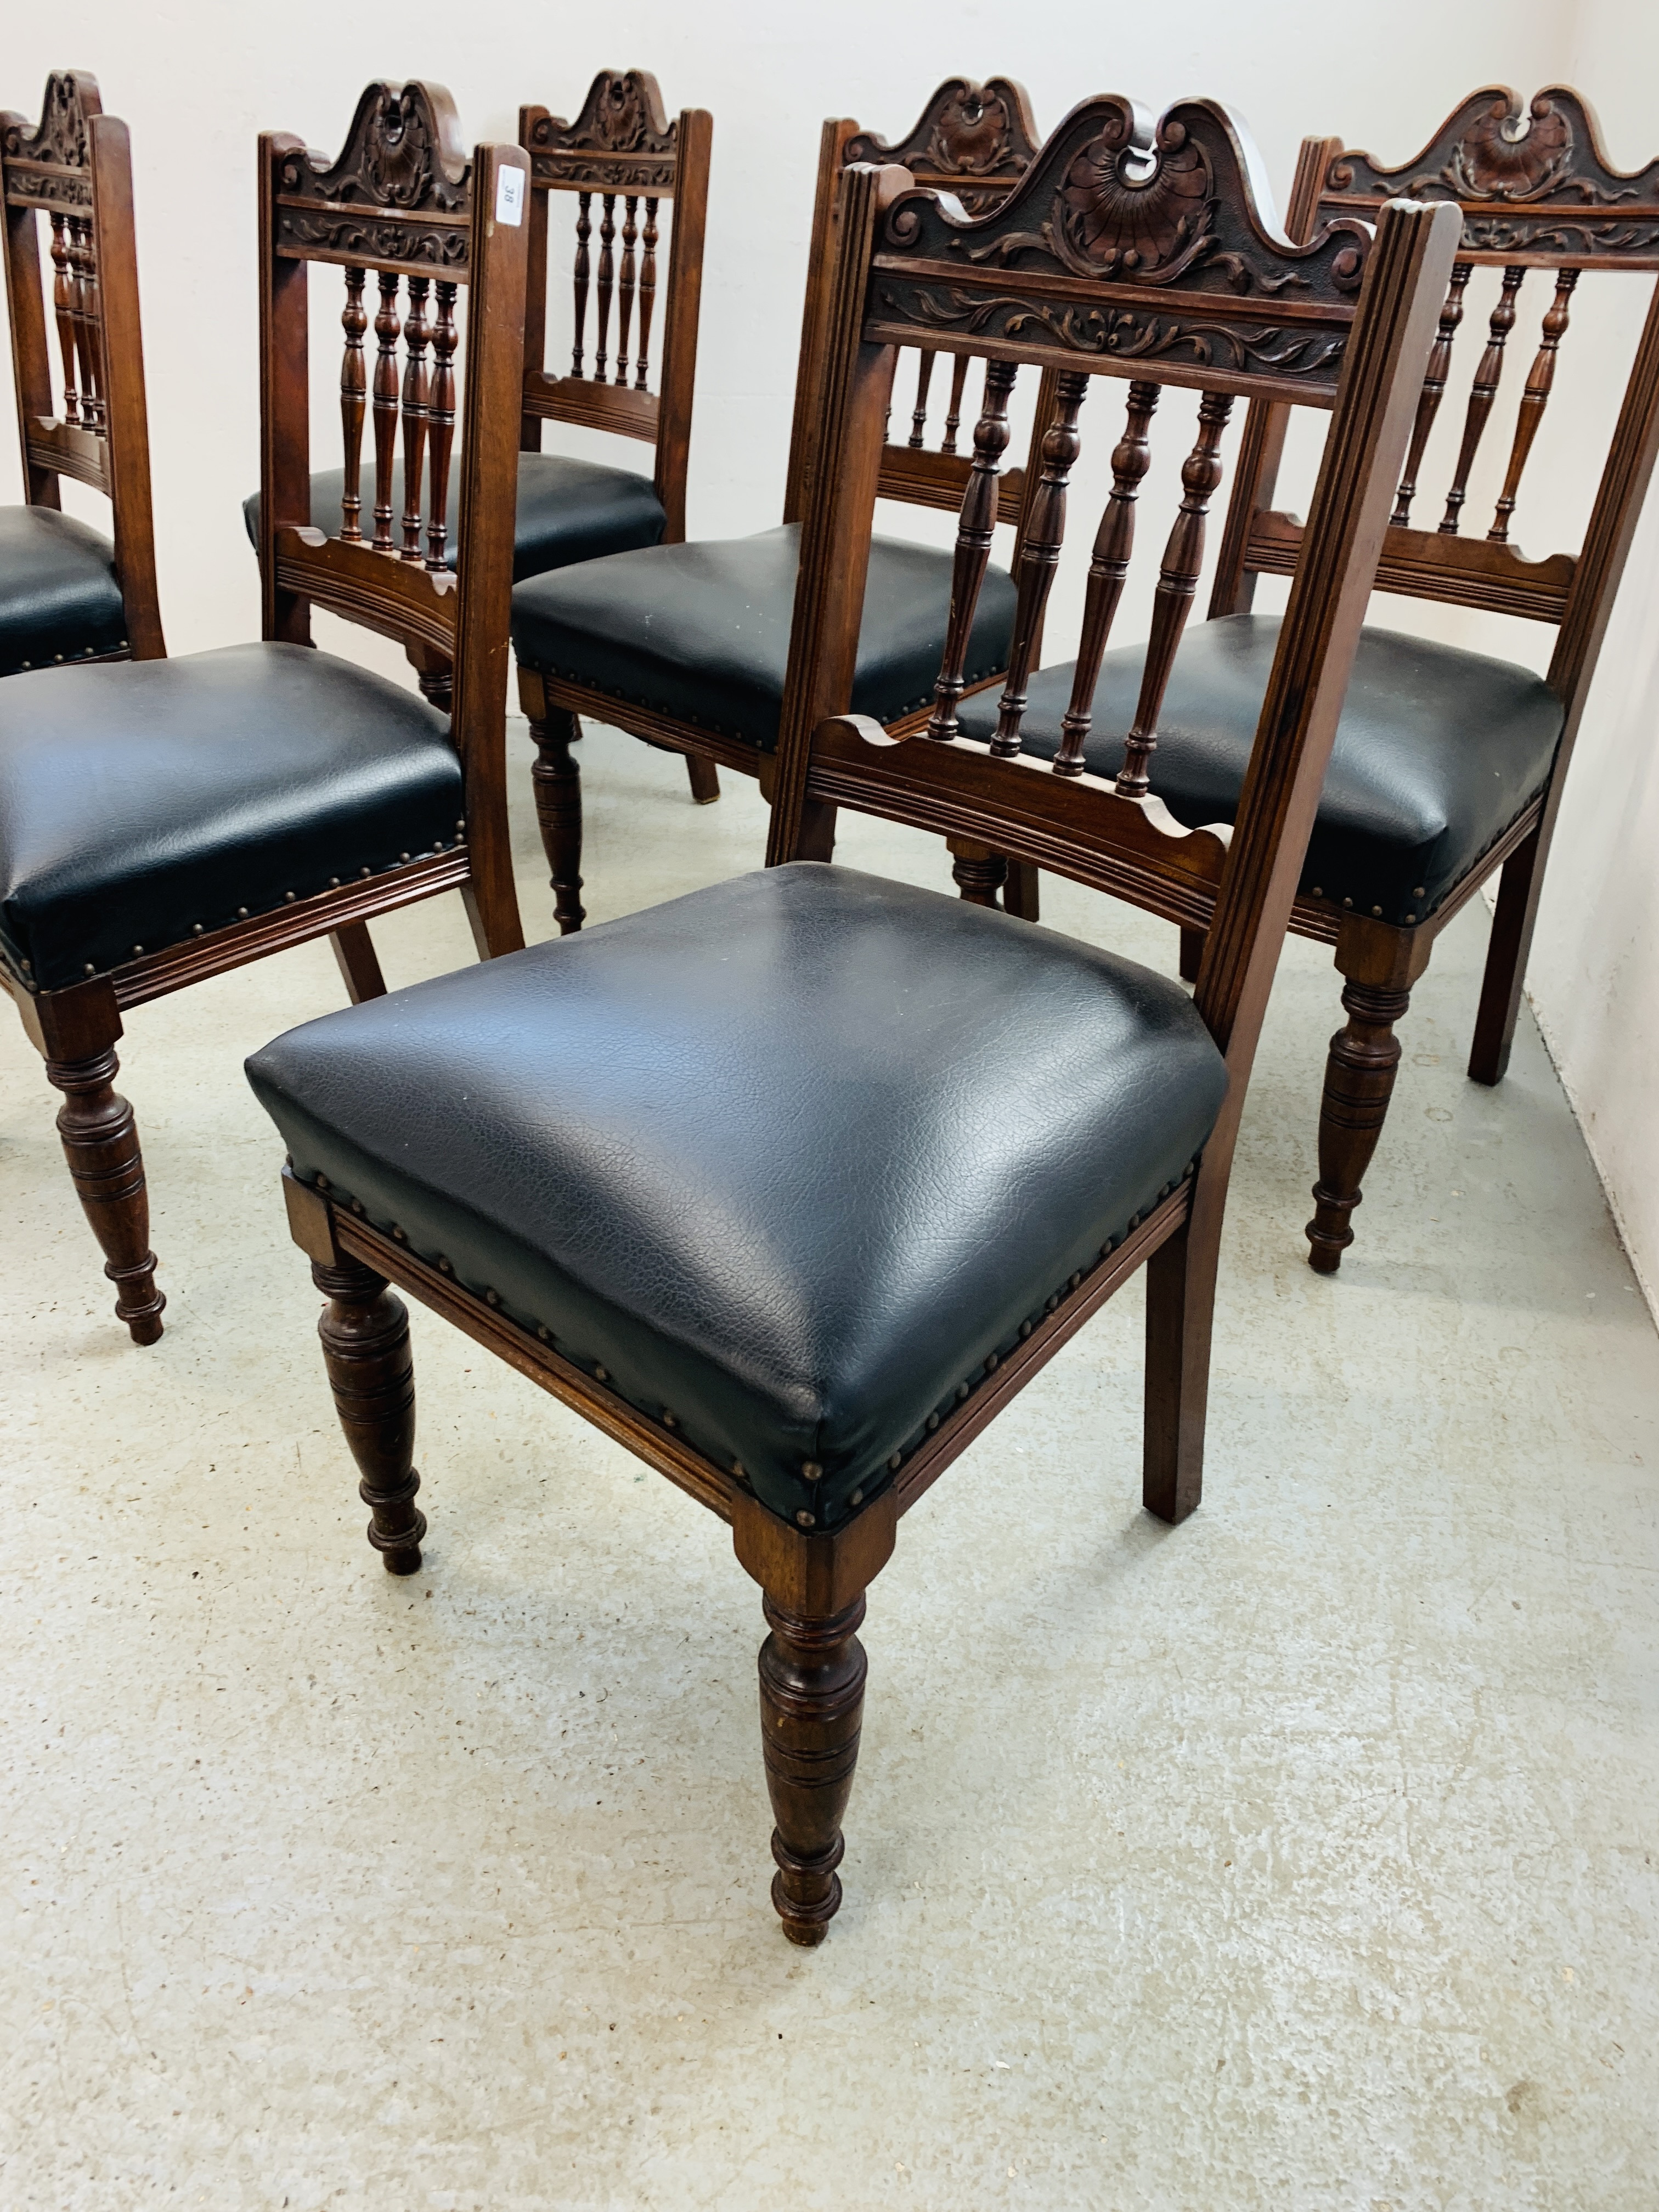 SET OF 6 PERIOD CARVED MAHOGANY DINING CHAIRS, BLACK LEATHER FINISH SEATS, - Image 3 of 10